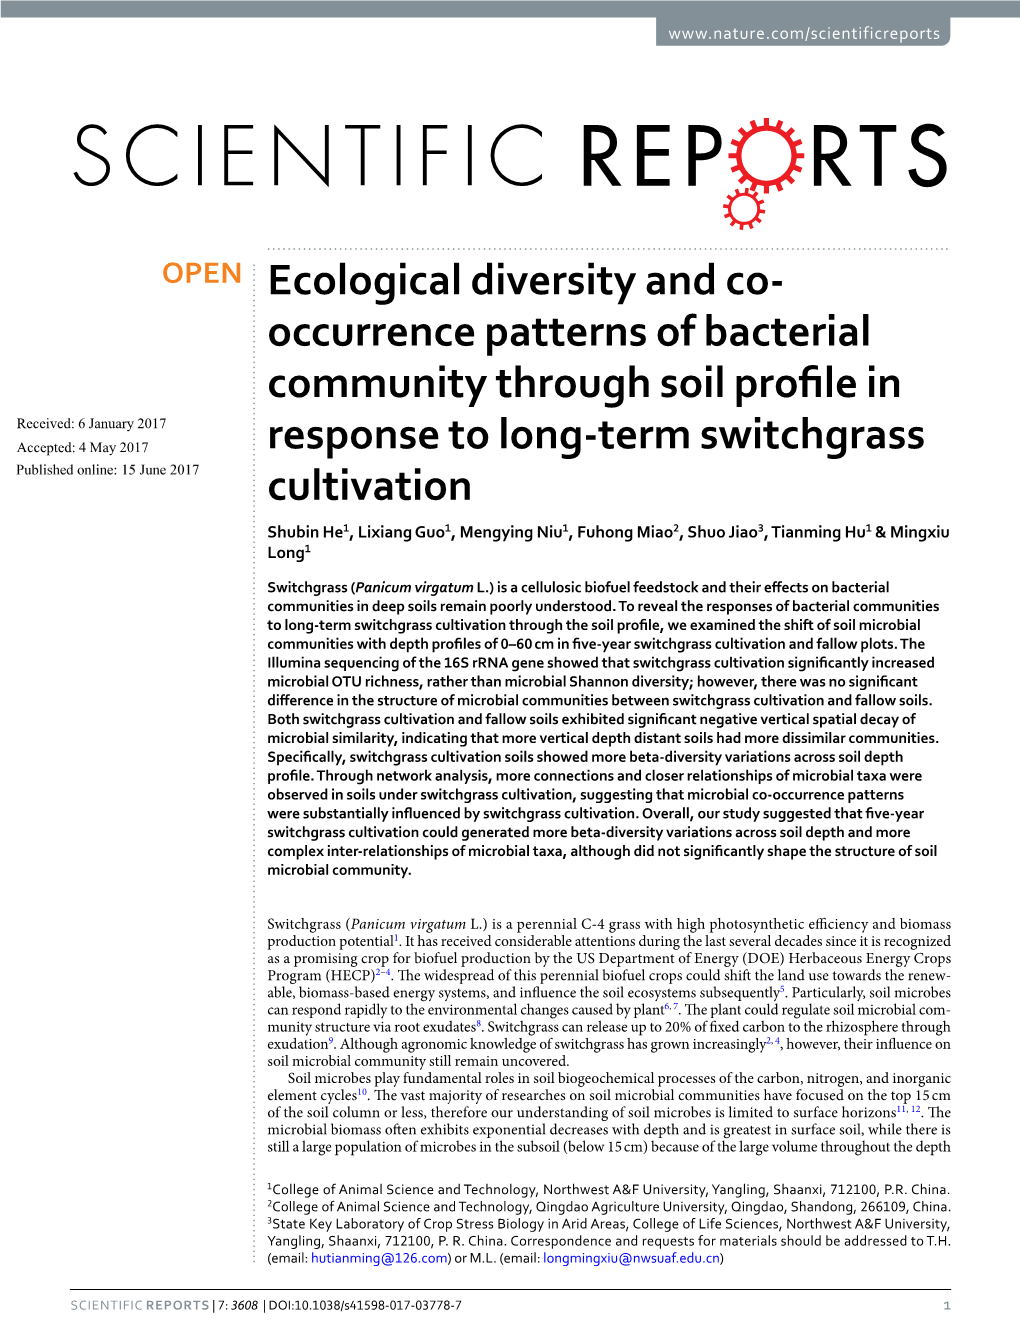 Occurrence Patterns of Bacterial Community Through Soil Profile In